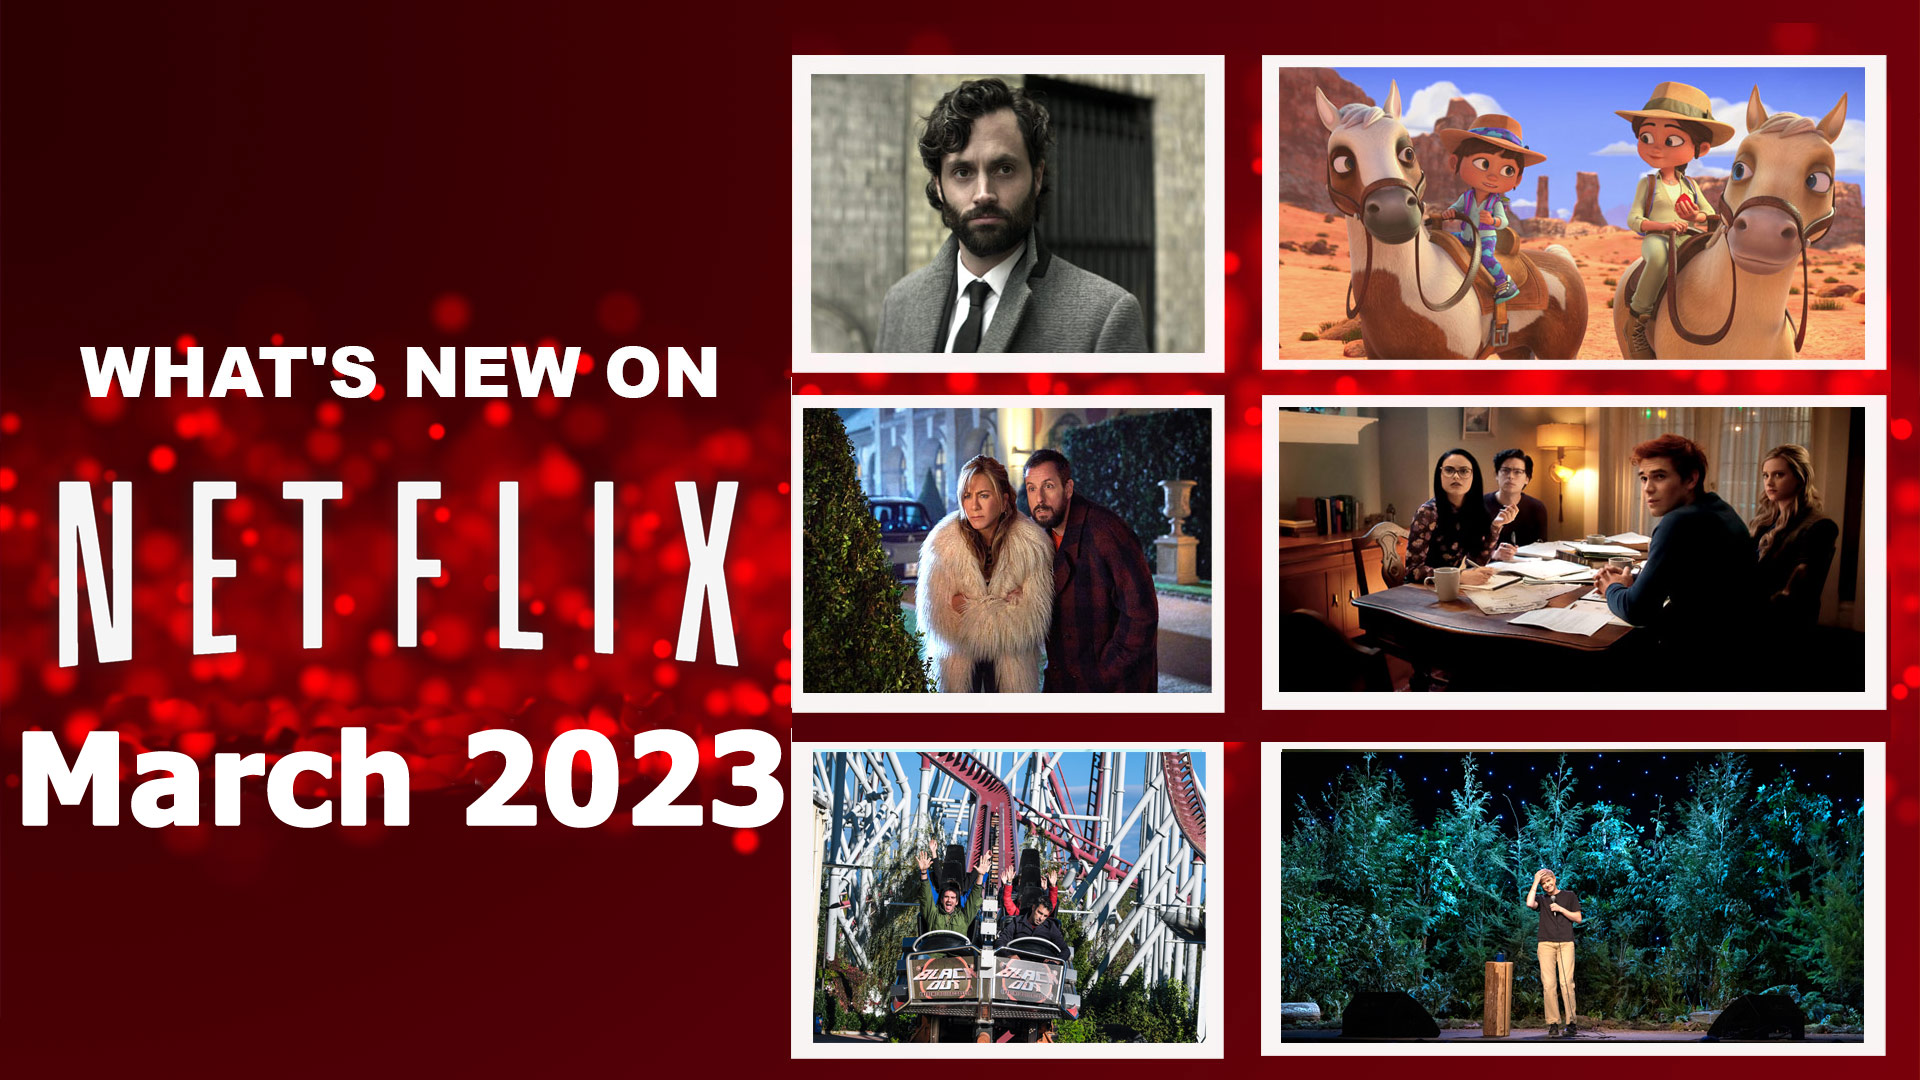 What's New on Netflix March 2023